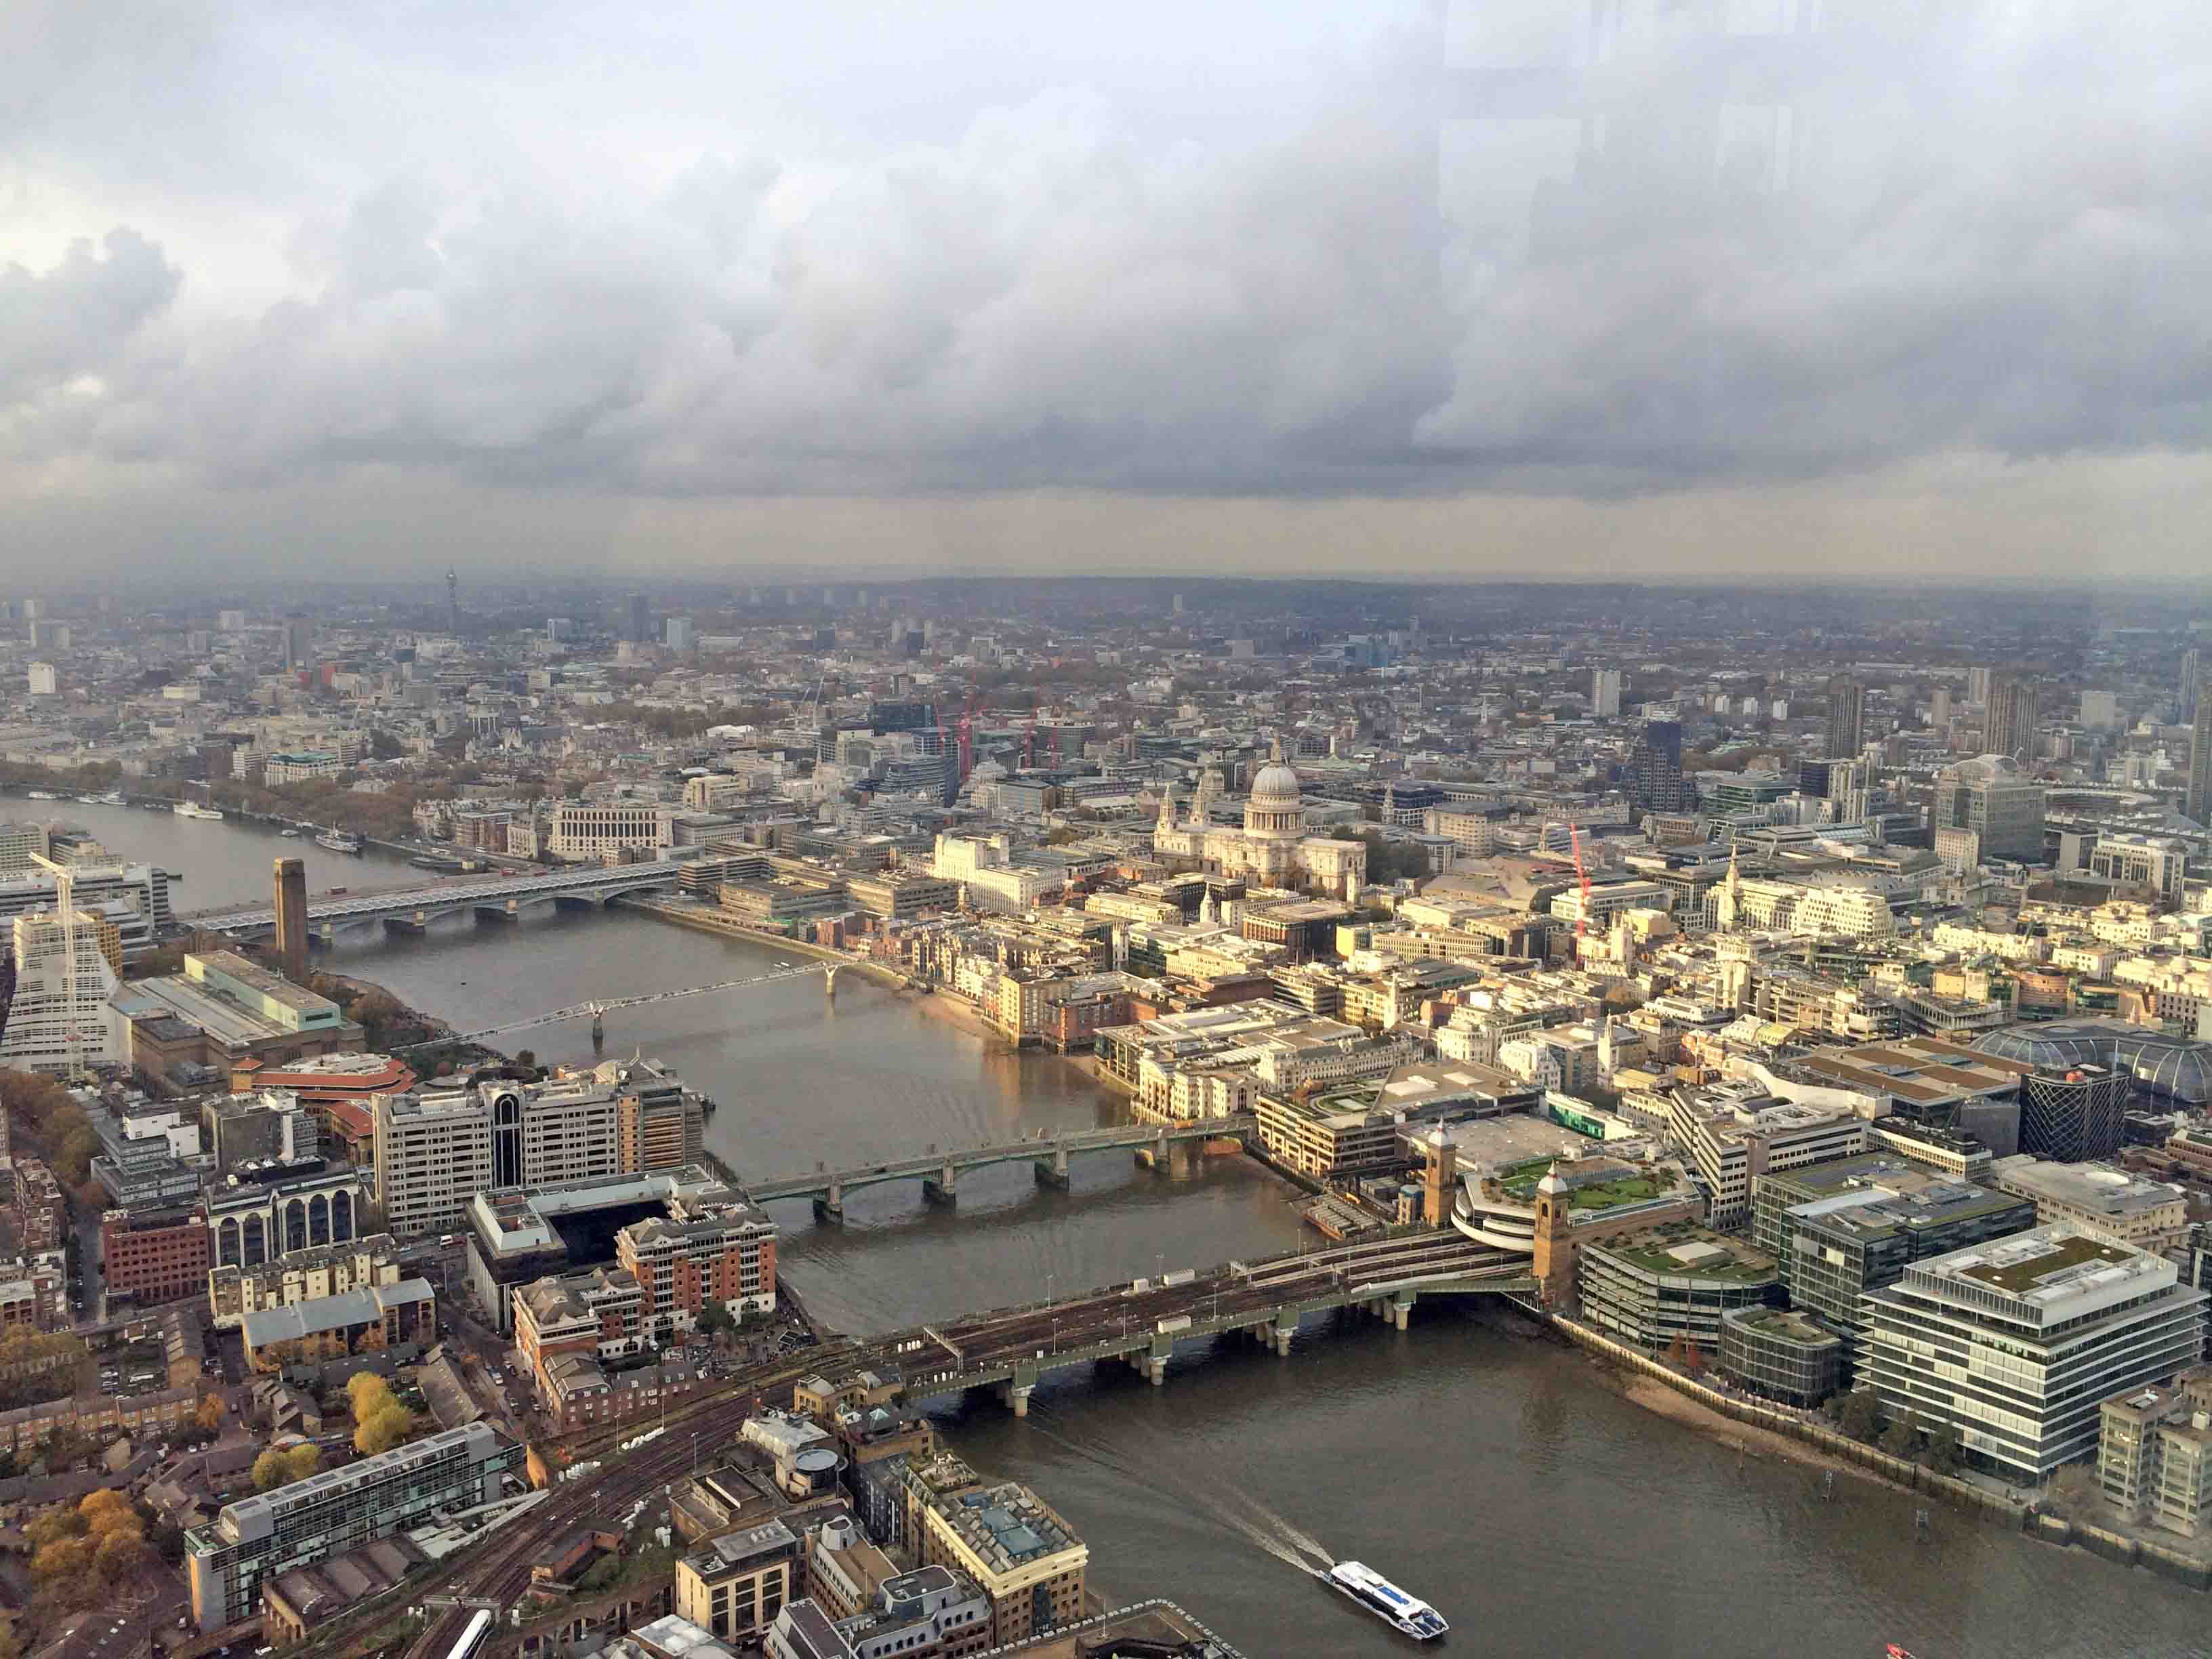 Exploring London: Borough Market & View From The Shard